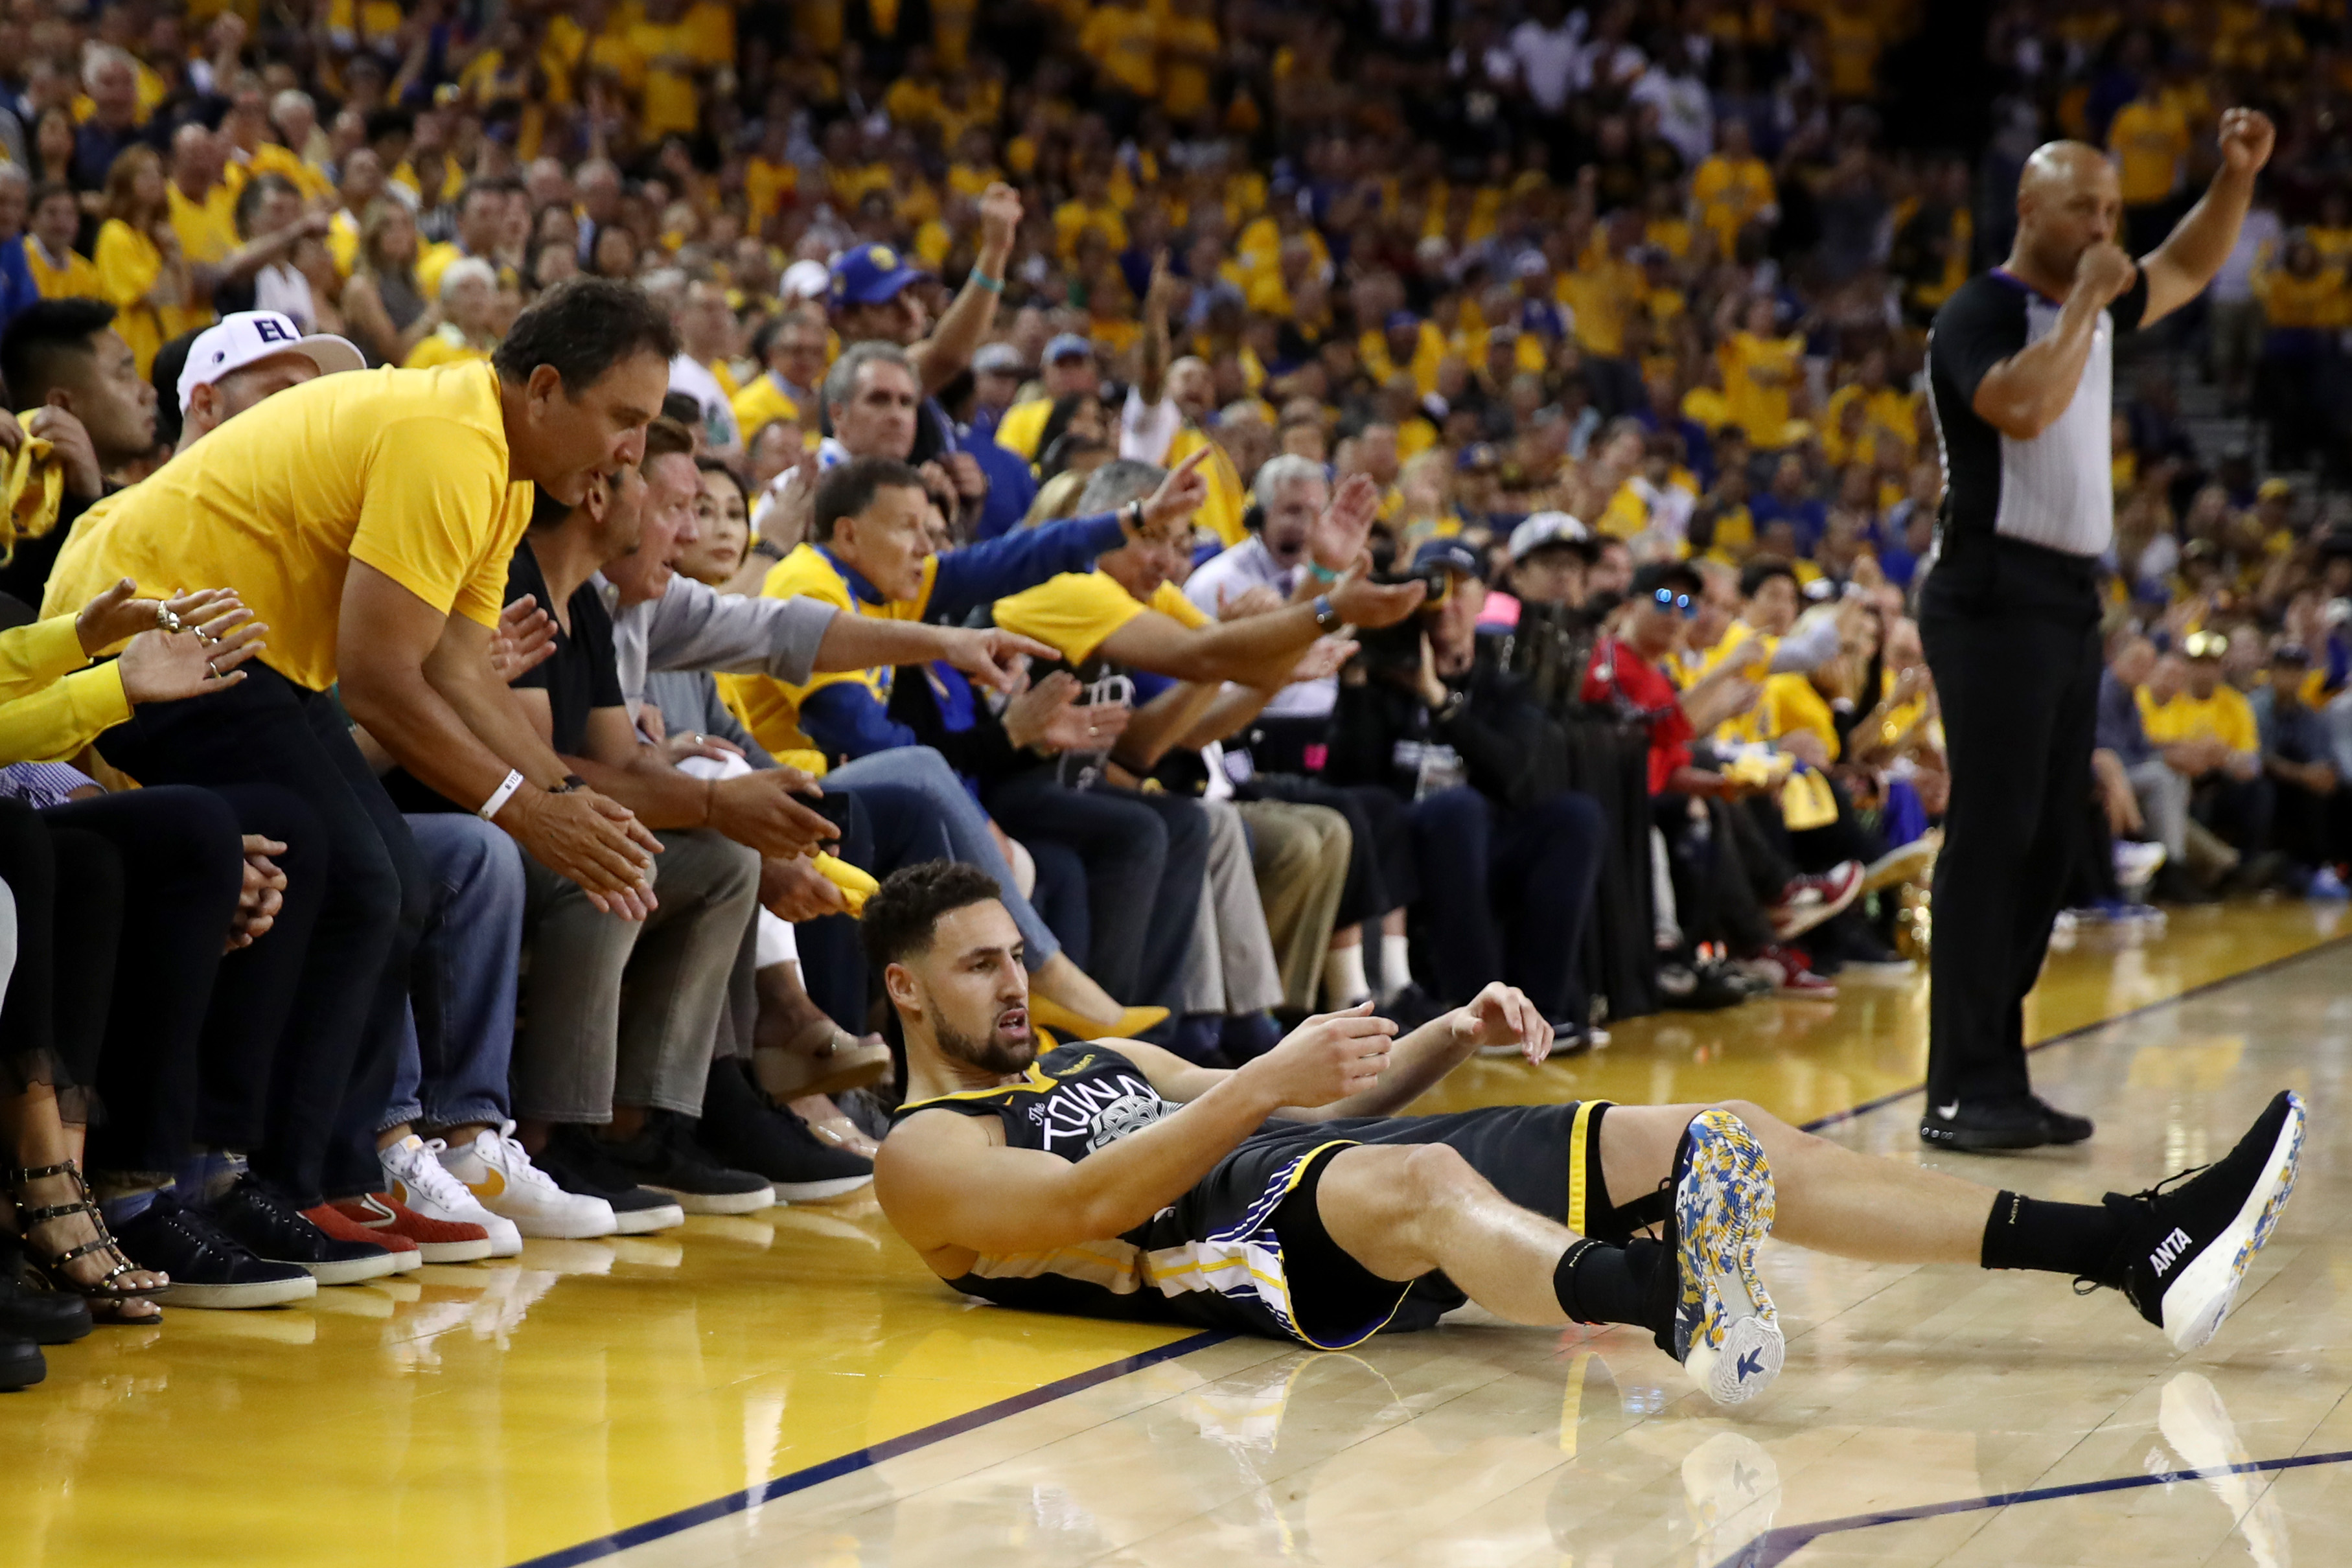 Klay Thompson Made a Bold Claim Before Dominating the NBA Finals Game That Would Change His Career